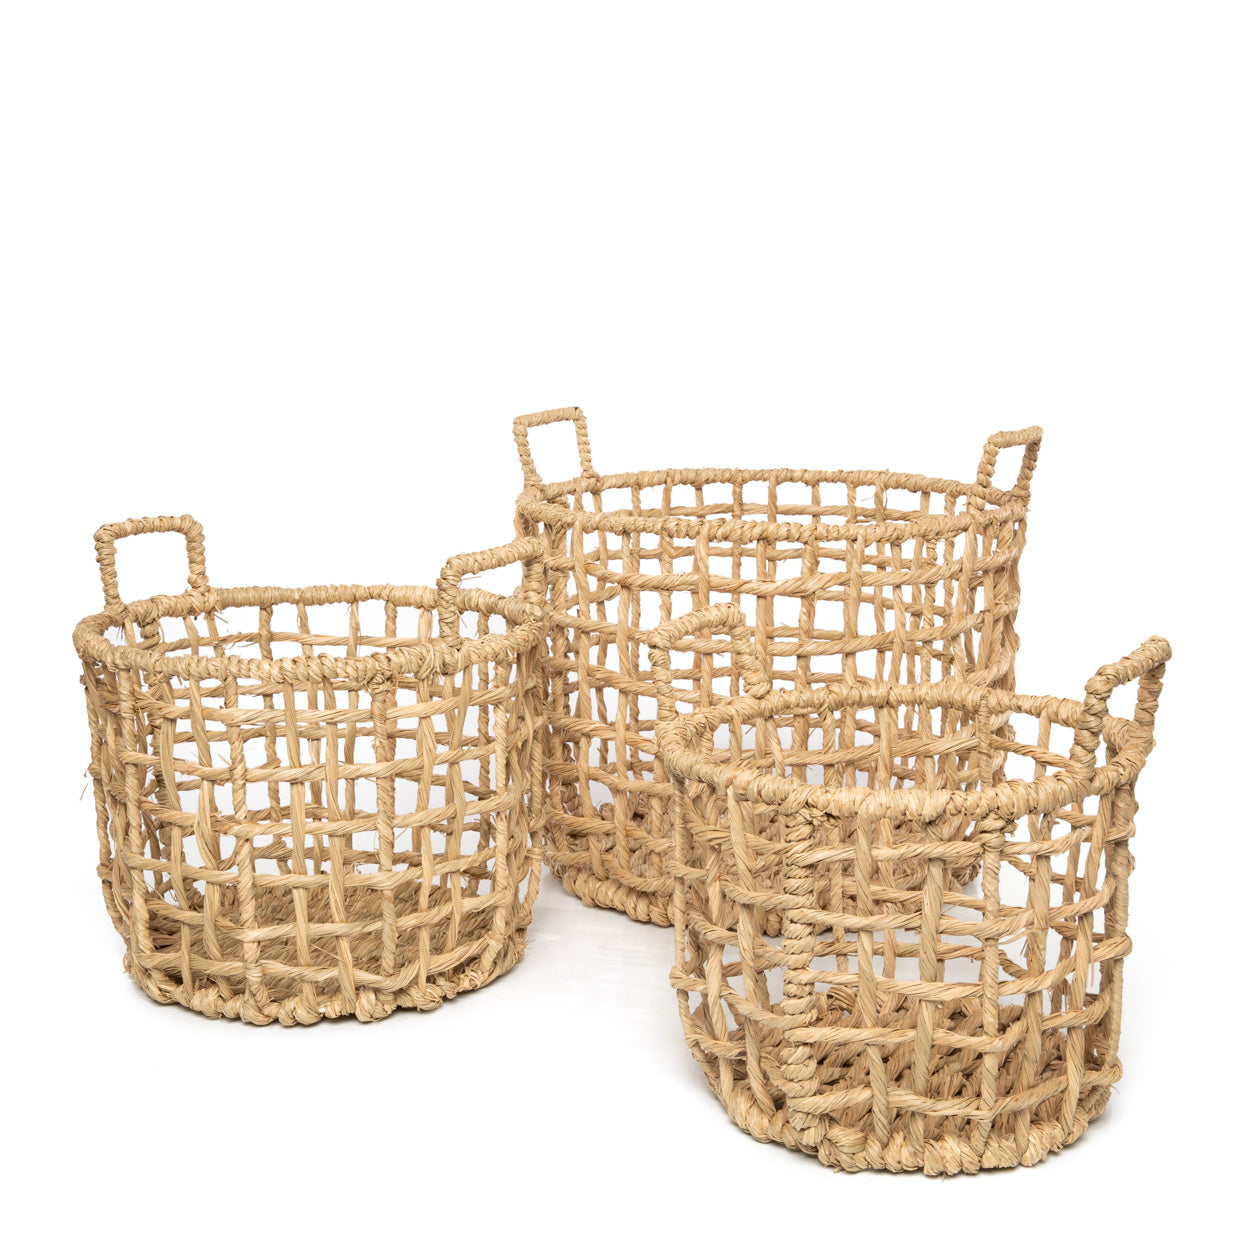 THE CUA DAI Baskets Set of 3 FRONT VIEW